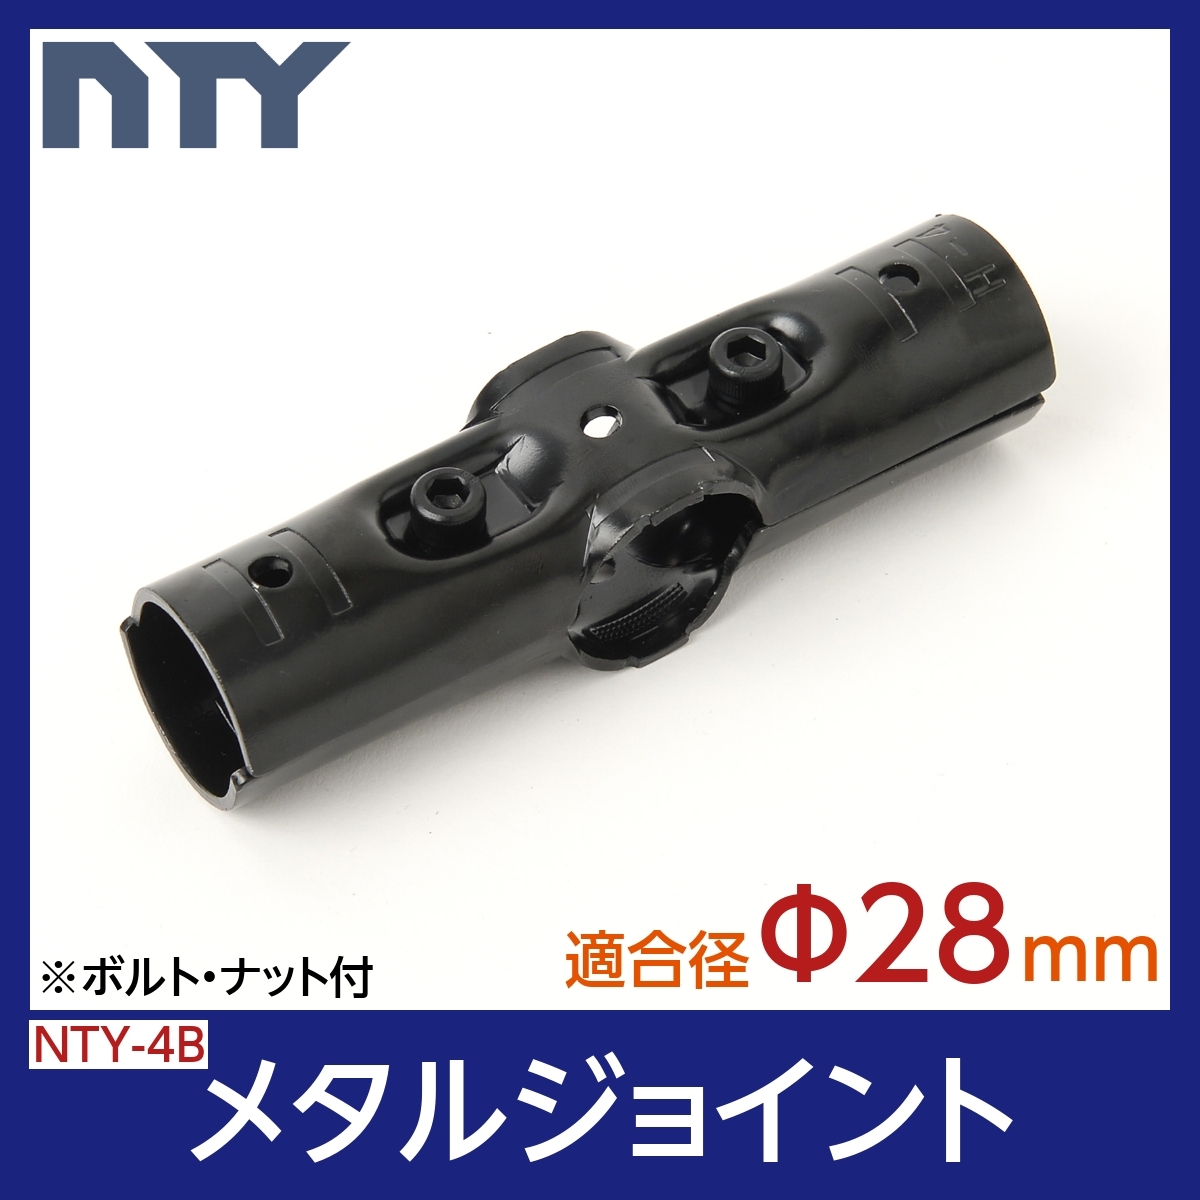 NTY metal joint NTY-4B black Φ28mm for (irekta- metal joint. HJ-4. compatibility equipped ) assembly pipe joint coupling joint DIY shelves rack 